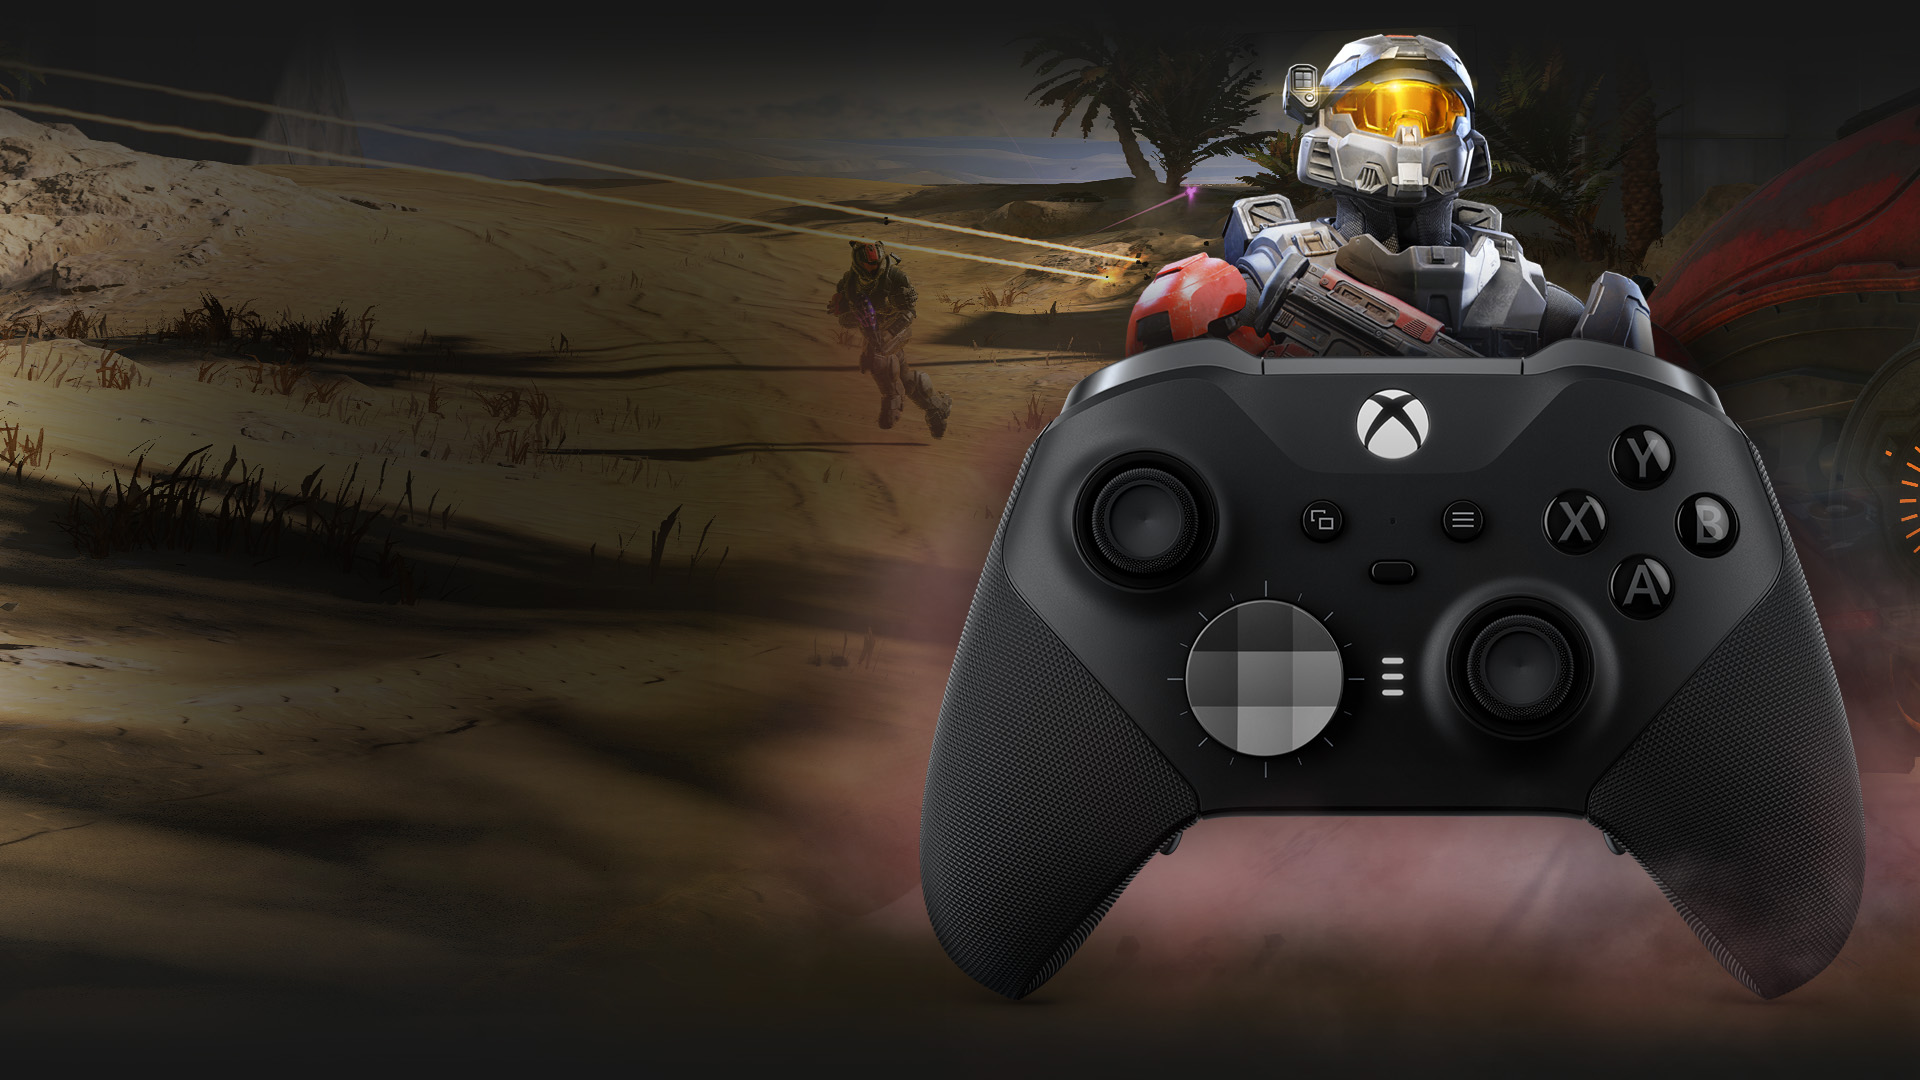 A multiplayer Spartan stands behind the Xbox Elite Wireless Controller Series 2. Two teams of Spartans battle it out in a desert environment in the background.